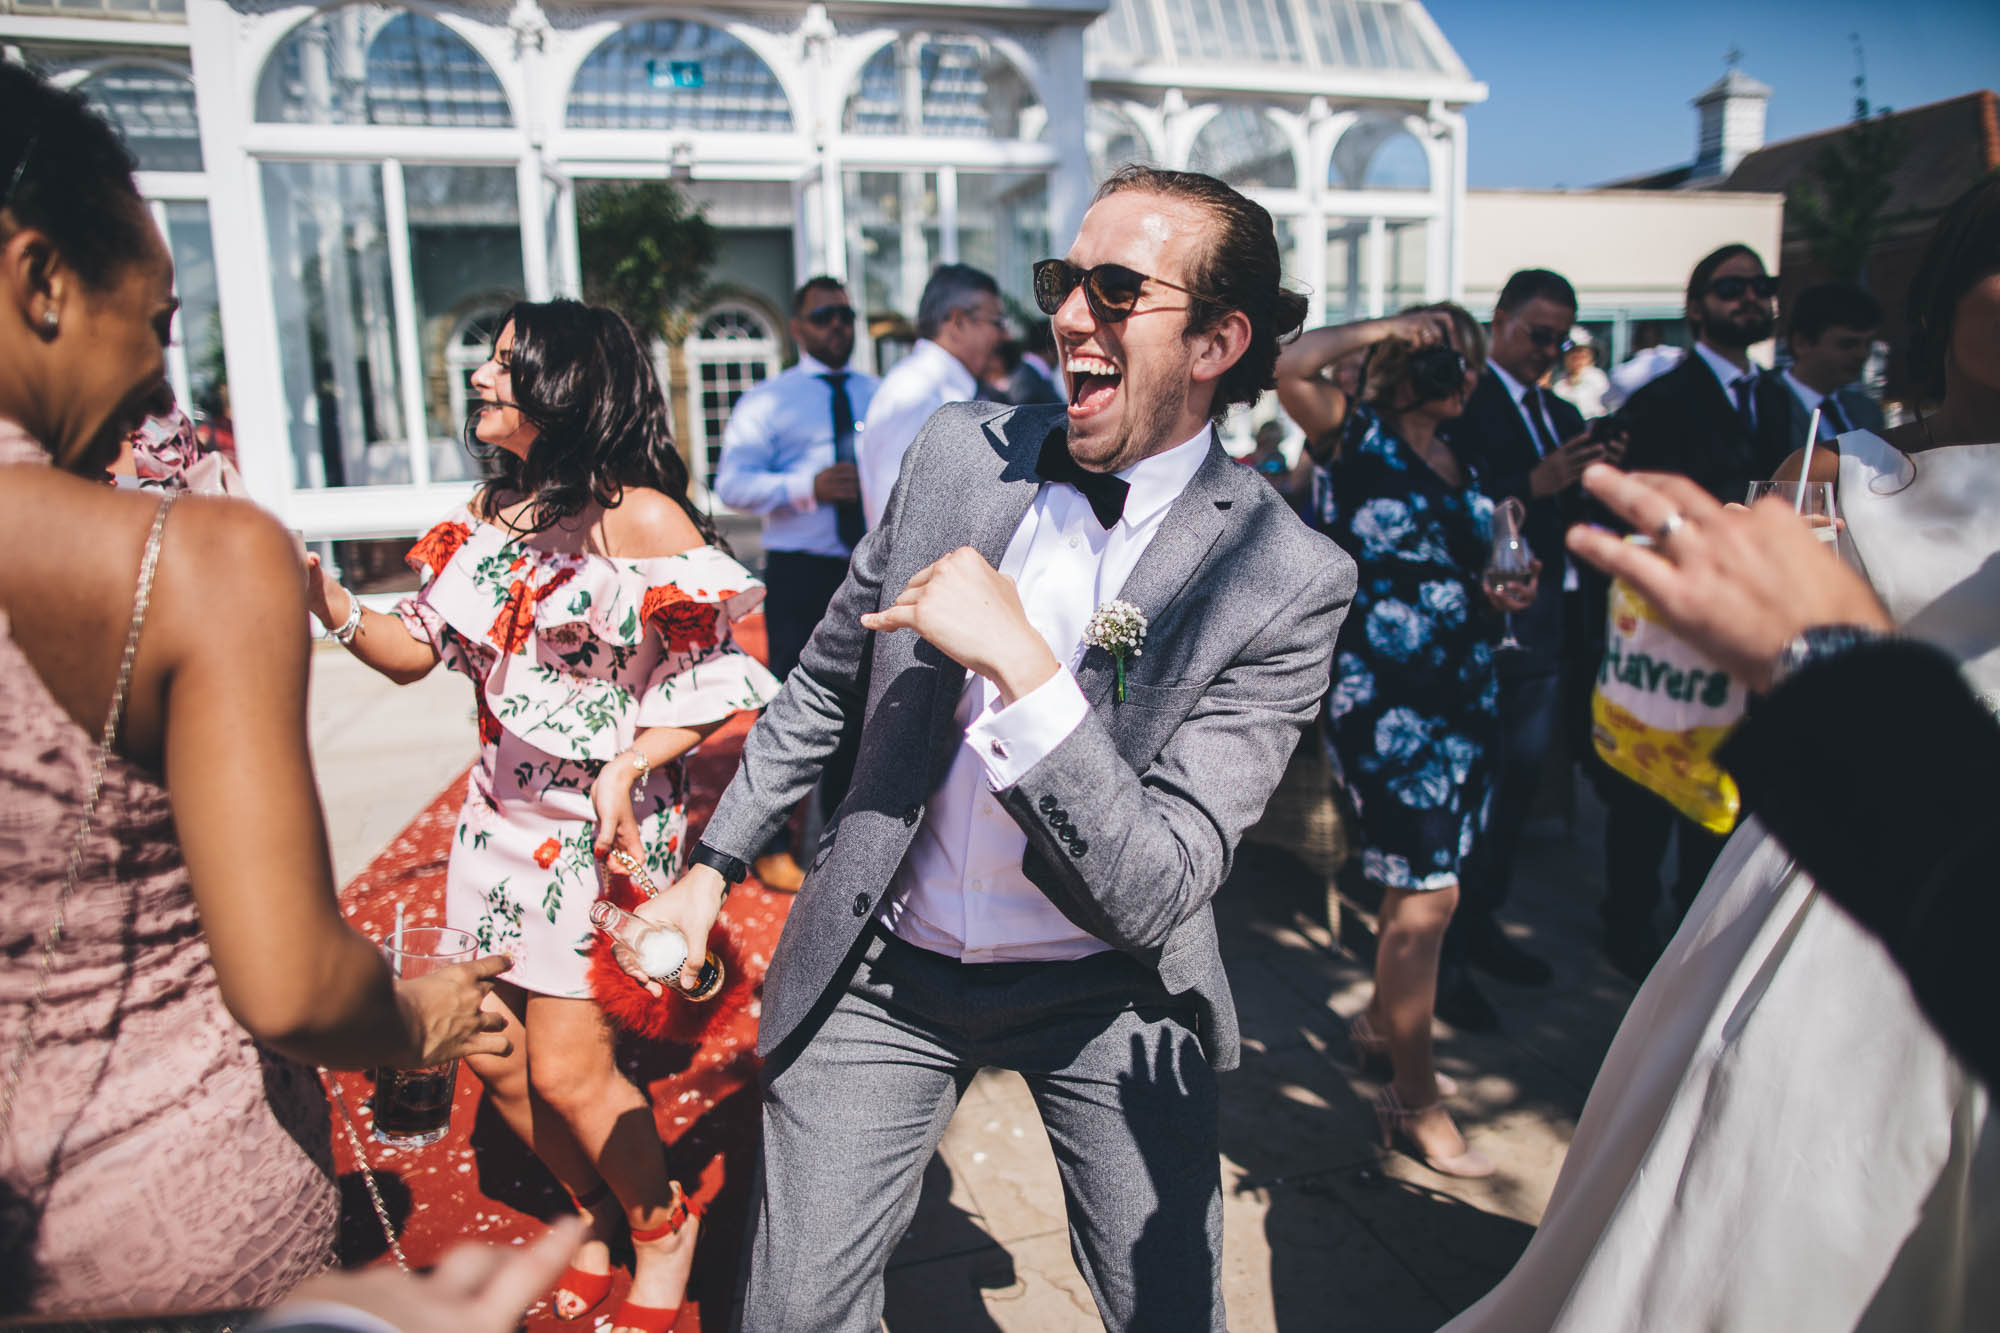 Groomsman dances with other guests outside wedding venue